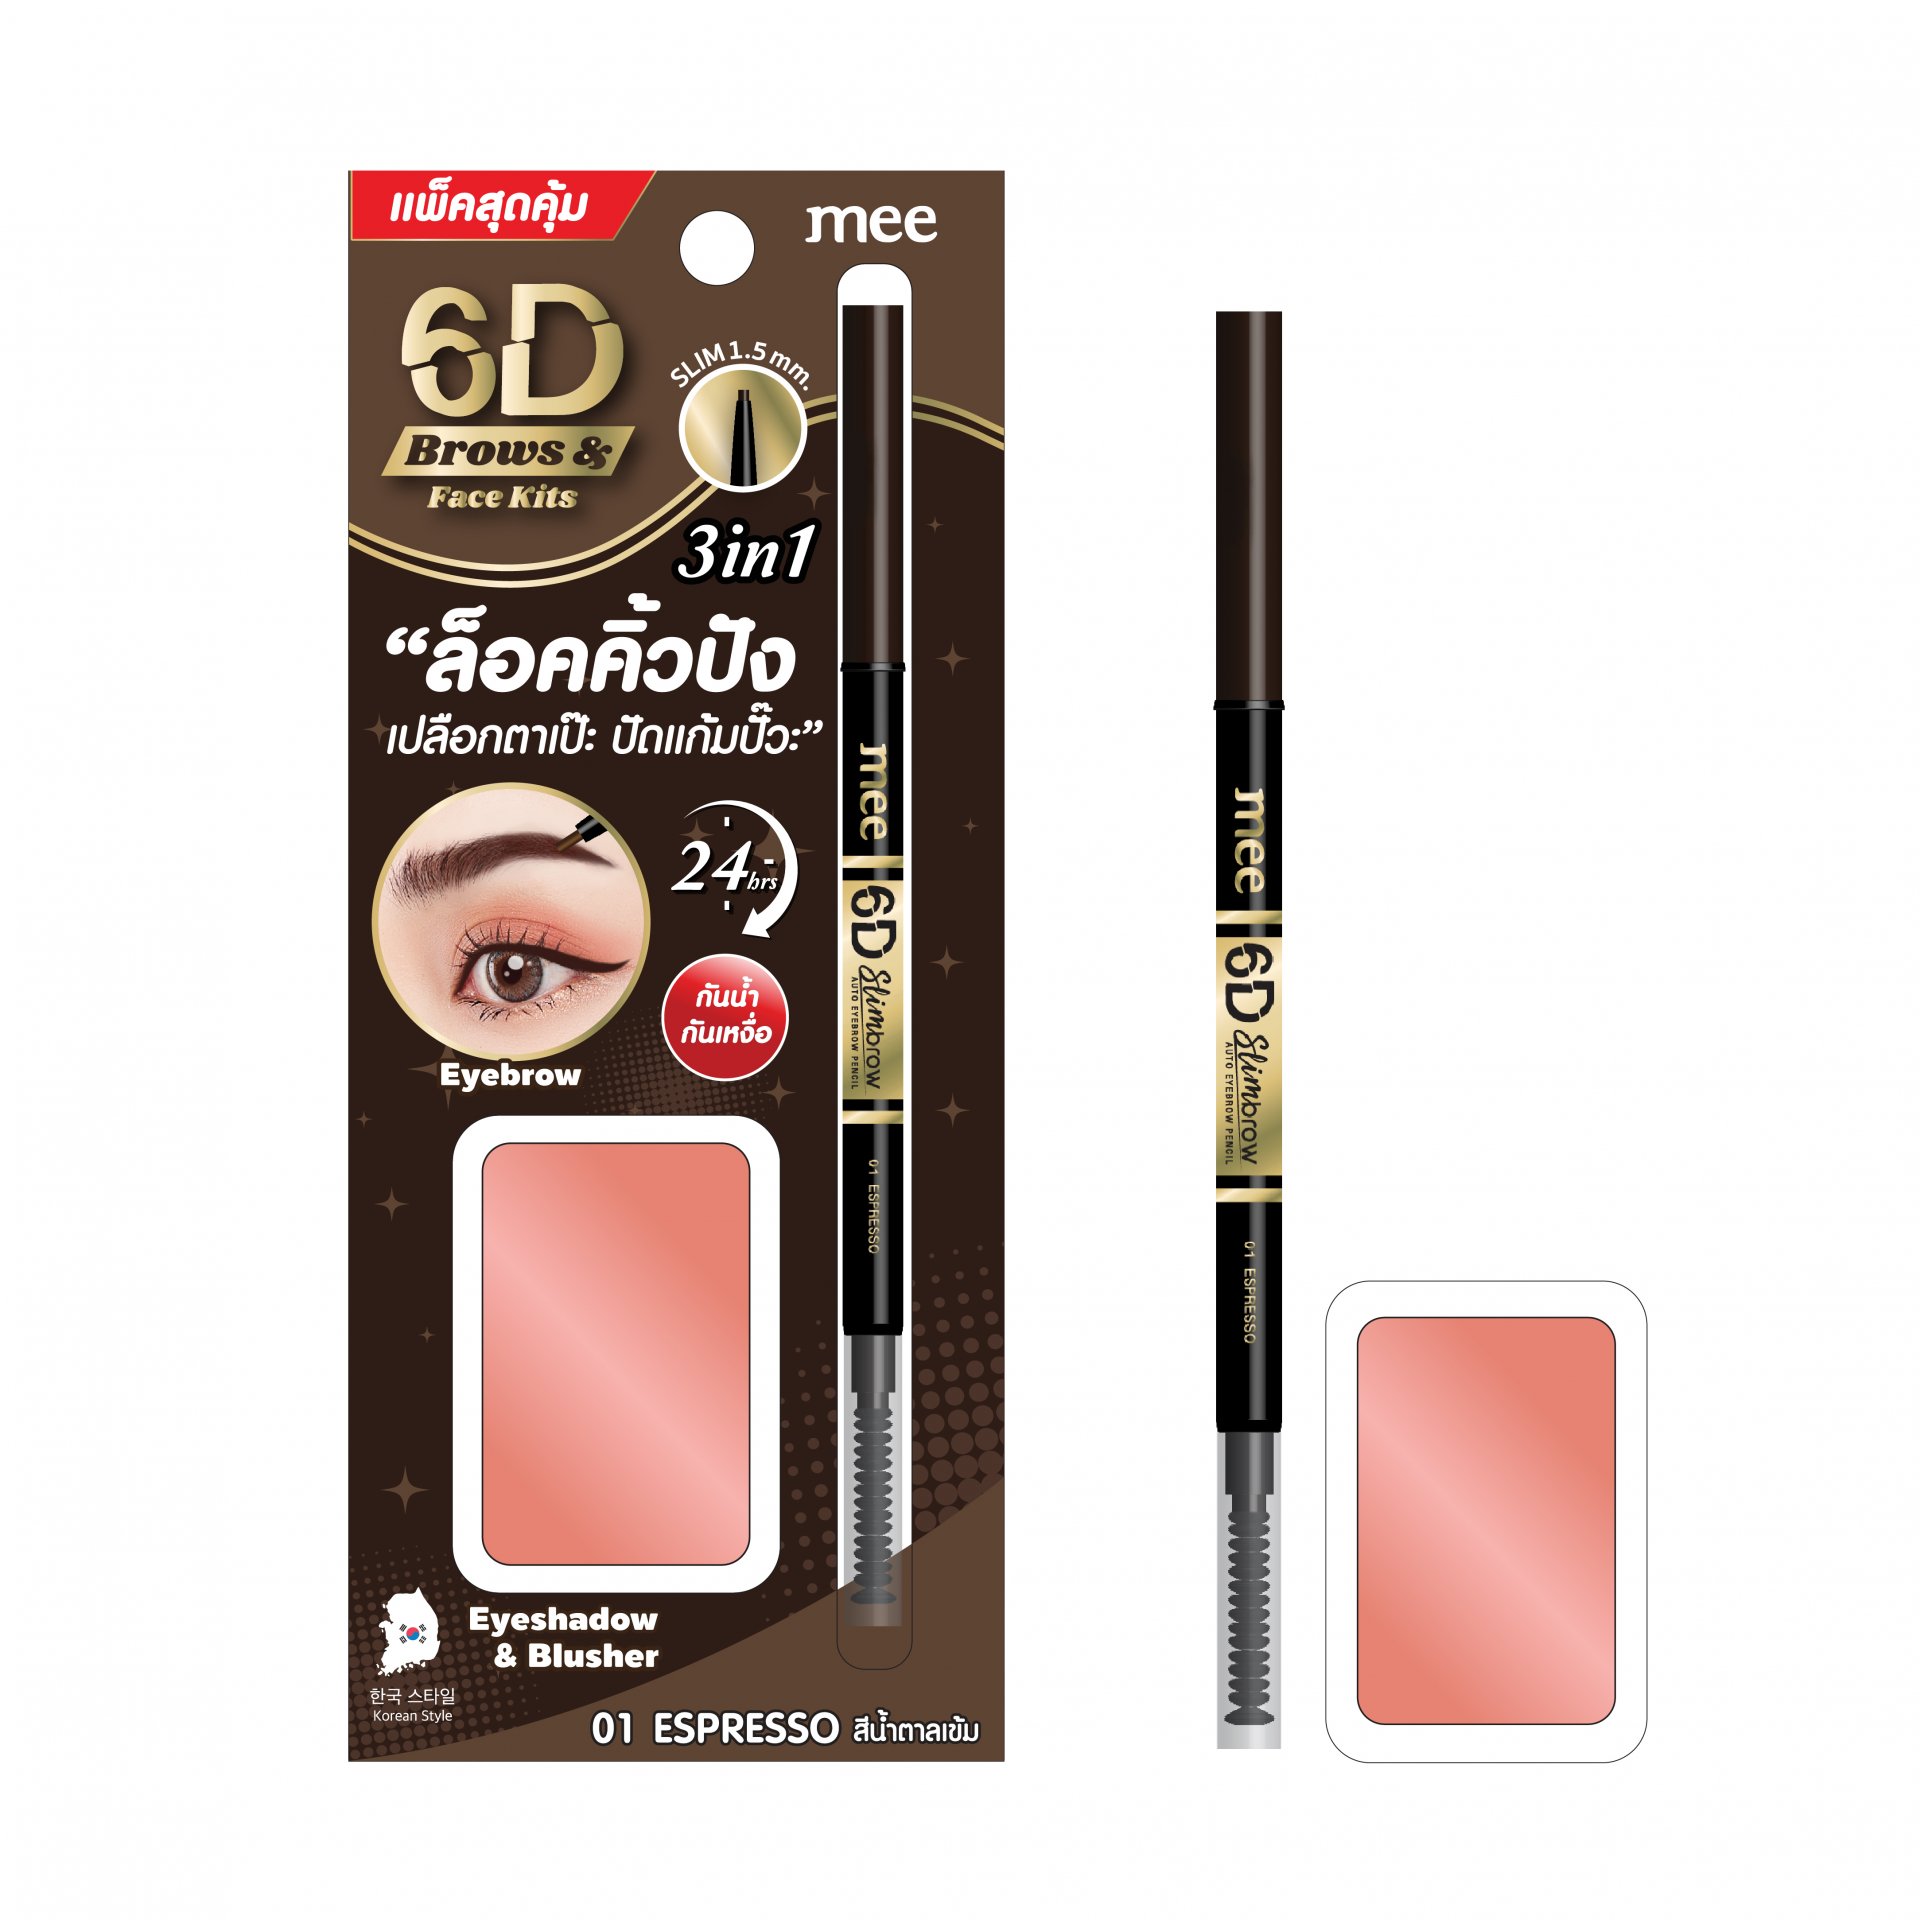 Mee 6D Brows & Face Kit 01 Espresso